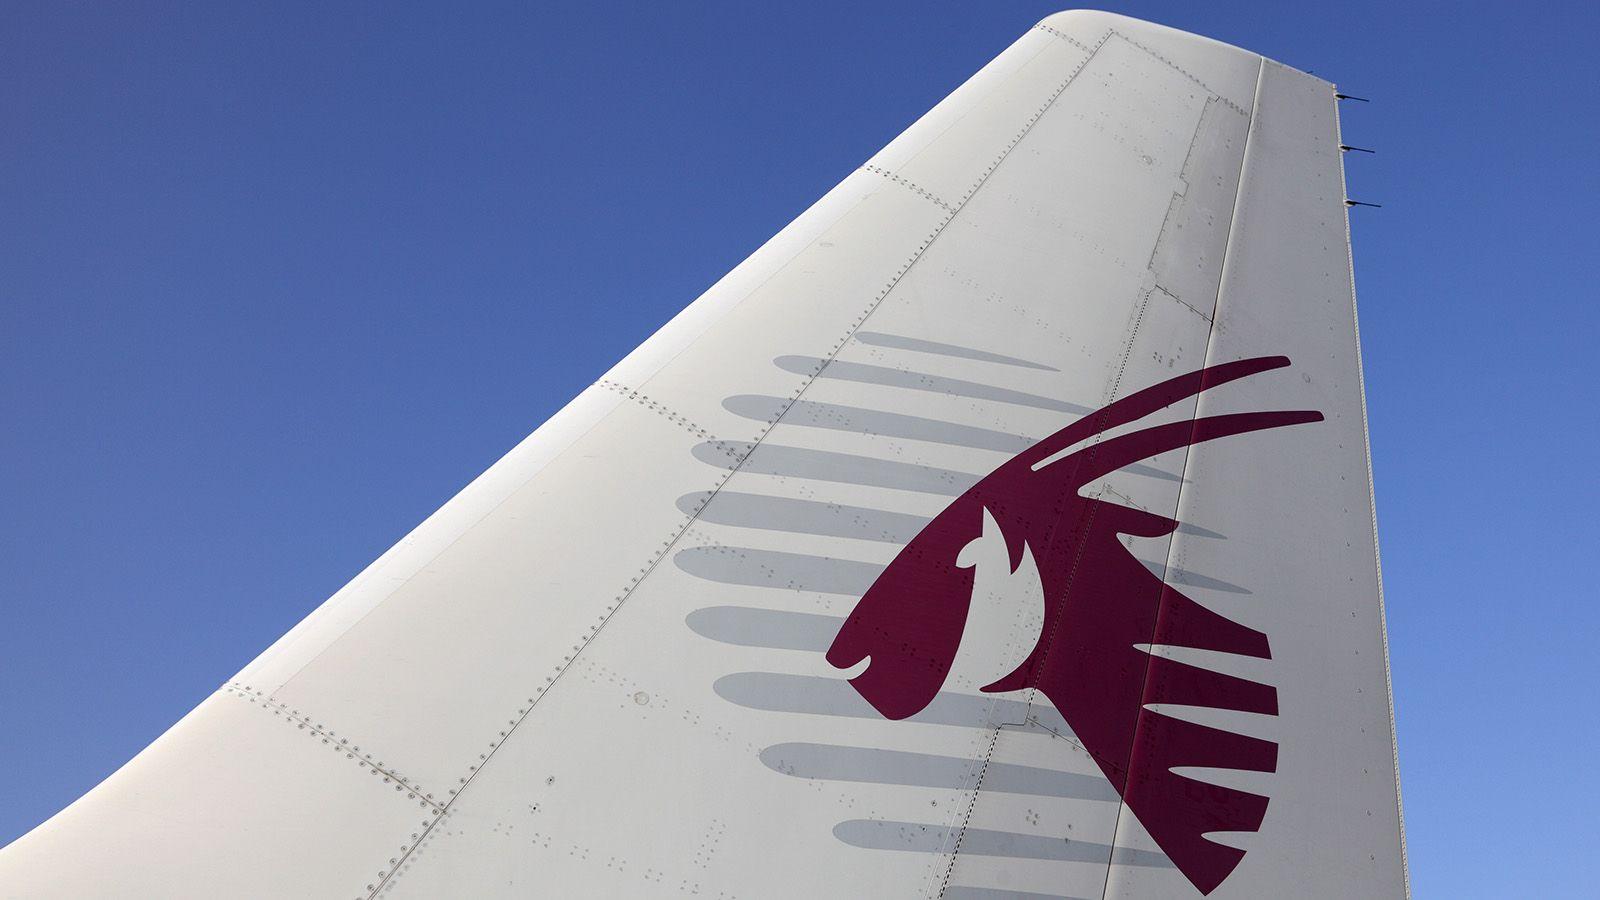 Qatar Airways receives special award for safety performance